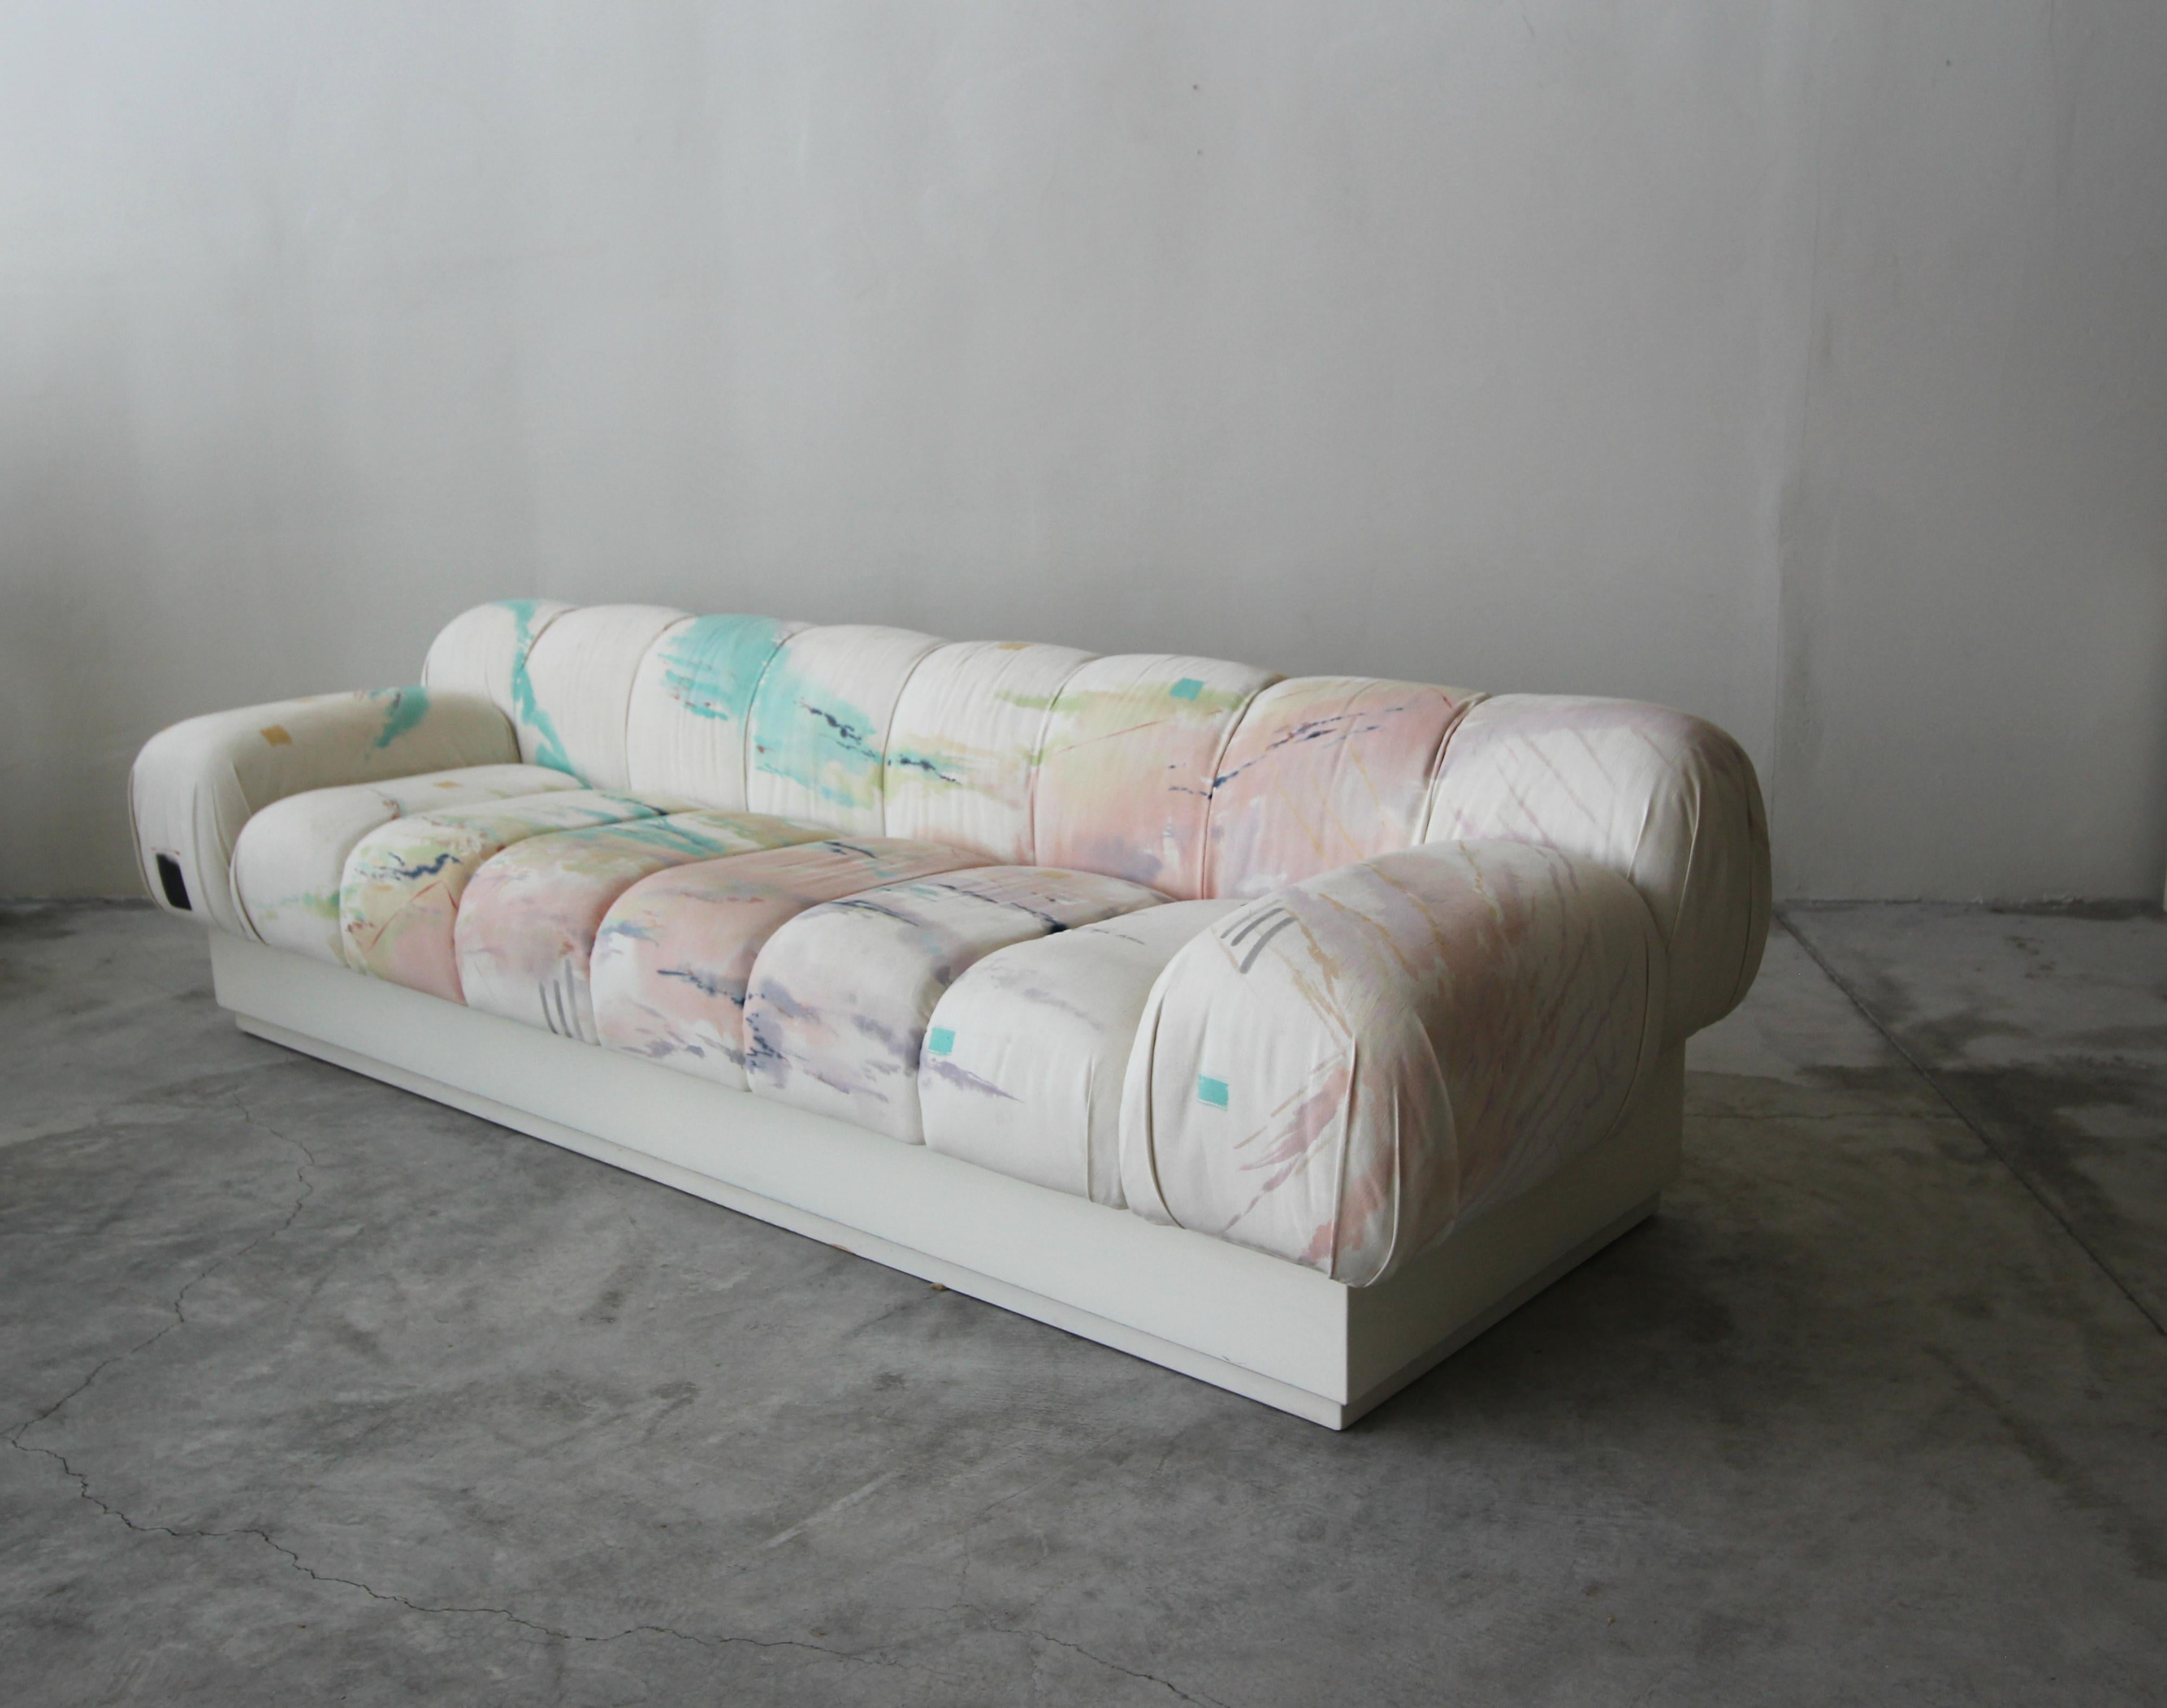 Incredible and large, Postmodern Italian style sofa on a plinth base. Most likely a custom piece, this beauty truly has lines and curves worth coveting. Sofa is large, measuring over 8ft, seats 4-5 people.

Kept as found, in it's Pop Art style,